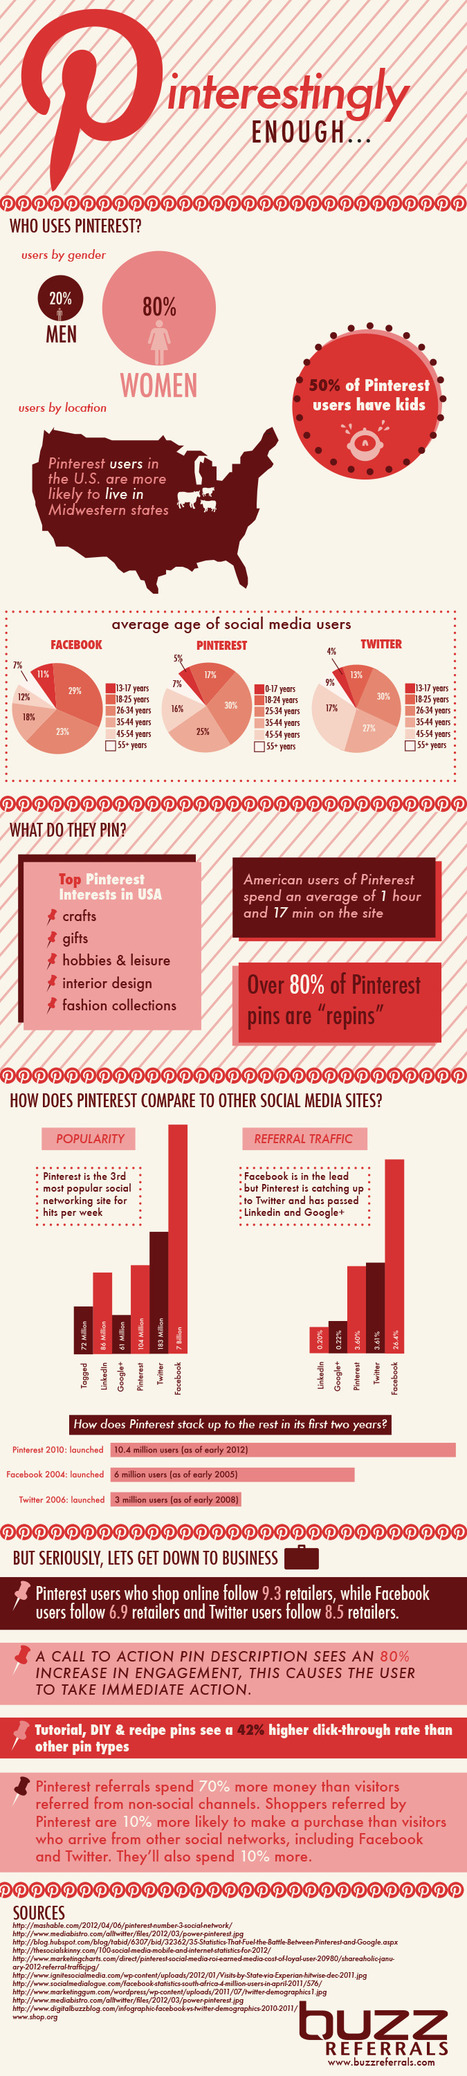 Social Media Infographic: Why Use Pinterest? | 21st Century Learning and Teaching | Scoop.it